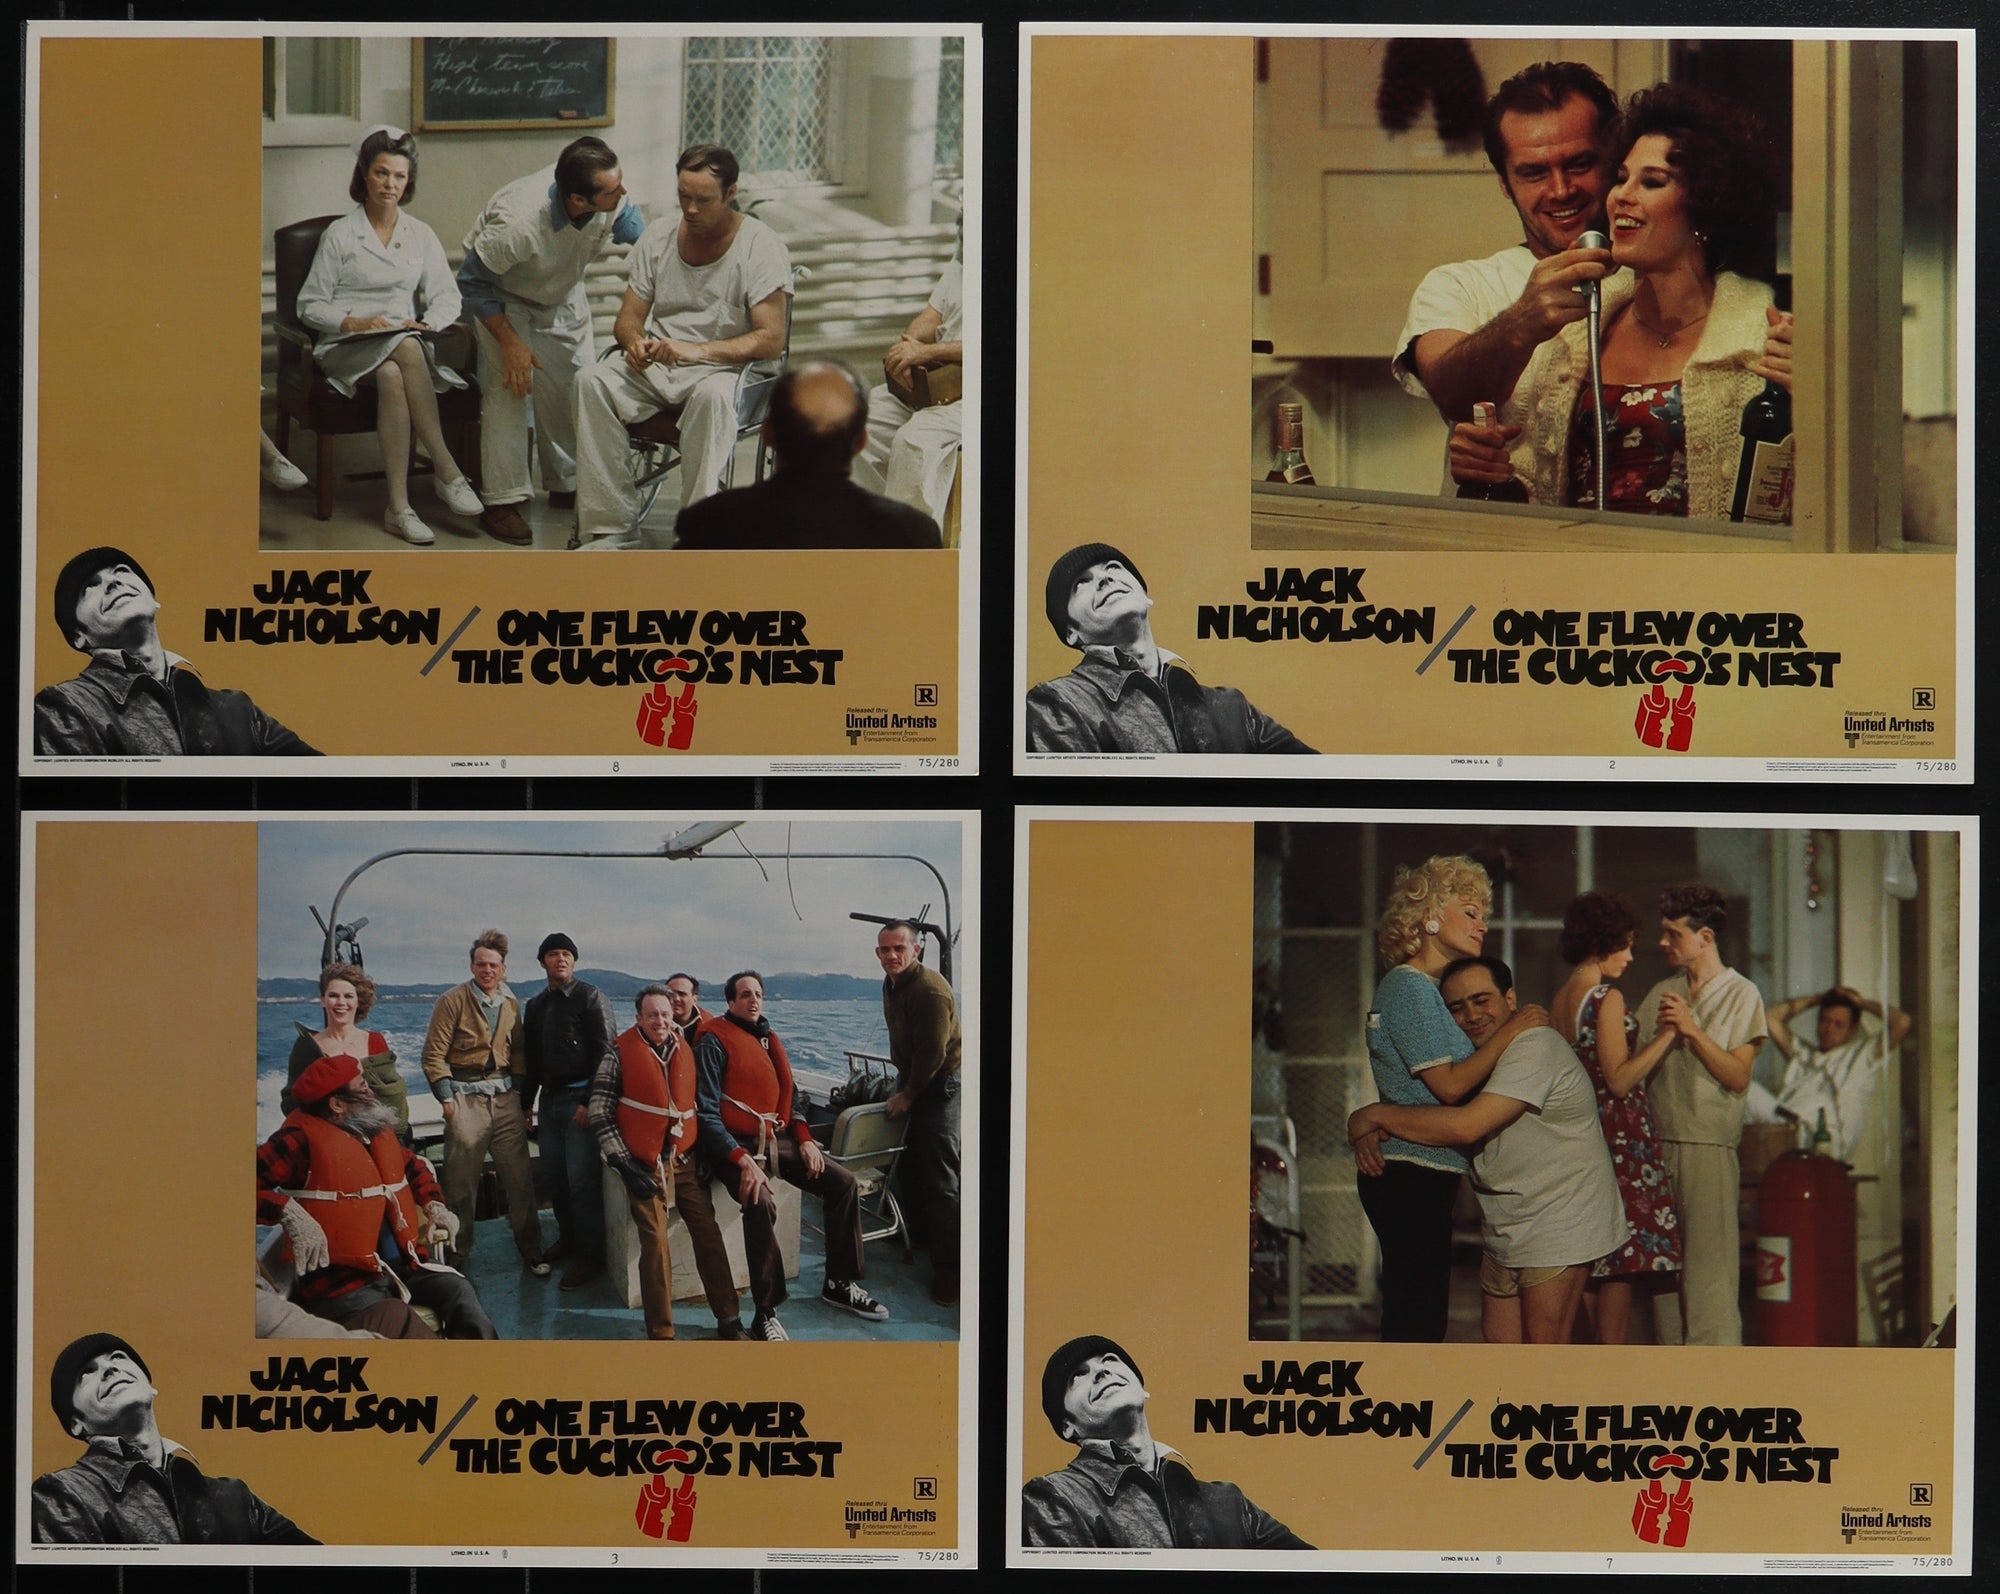 One Flew Over the Cuckoo's Nest Lobby Card Set (8-11x14) Original Vintage Movie Poster